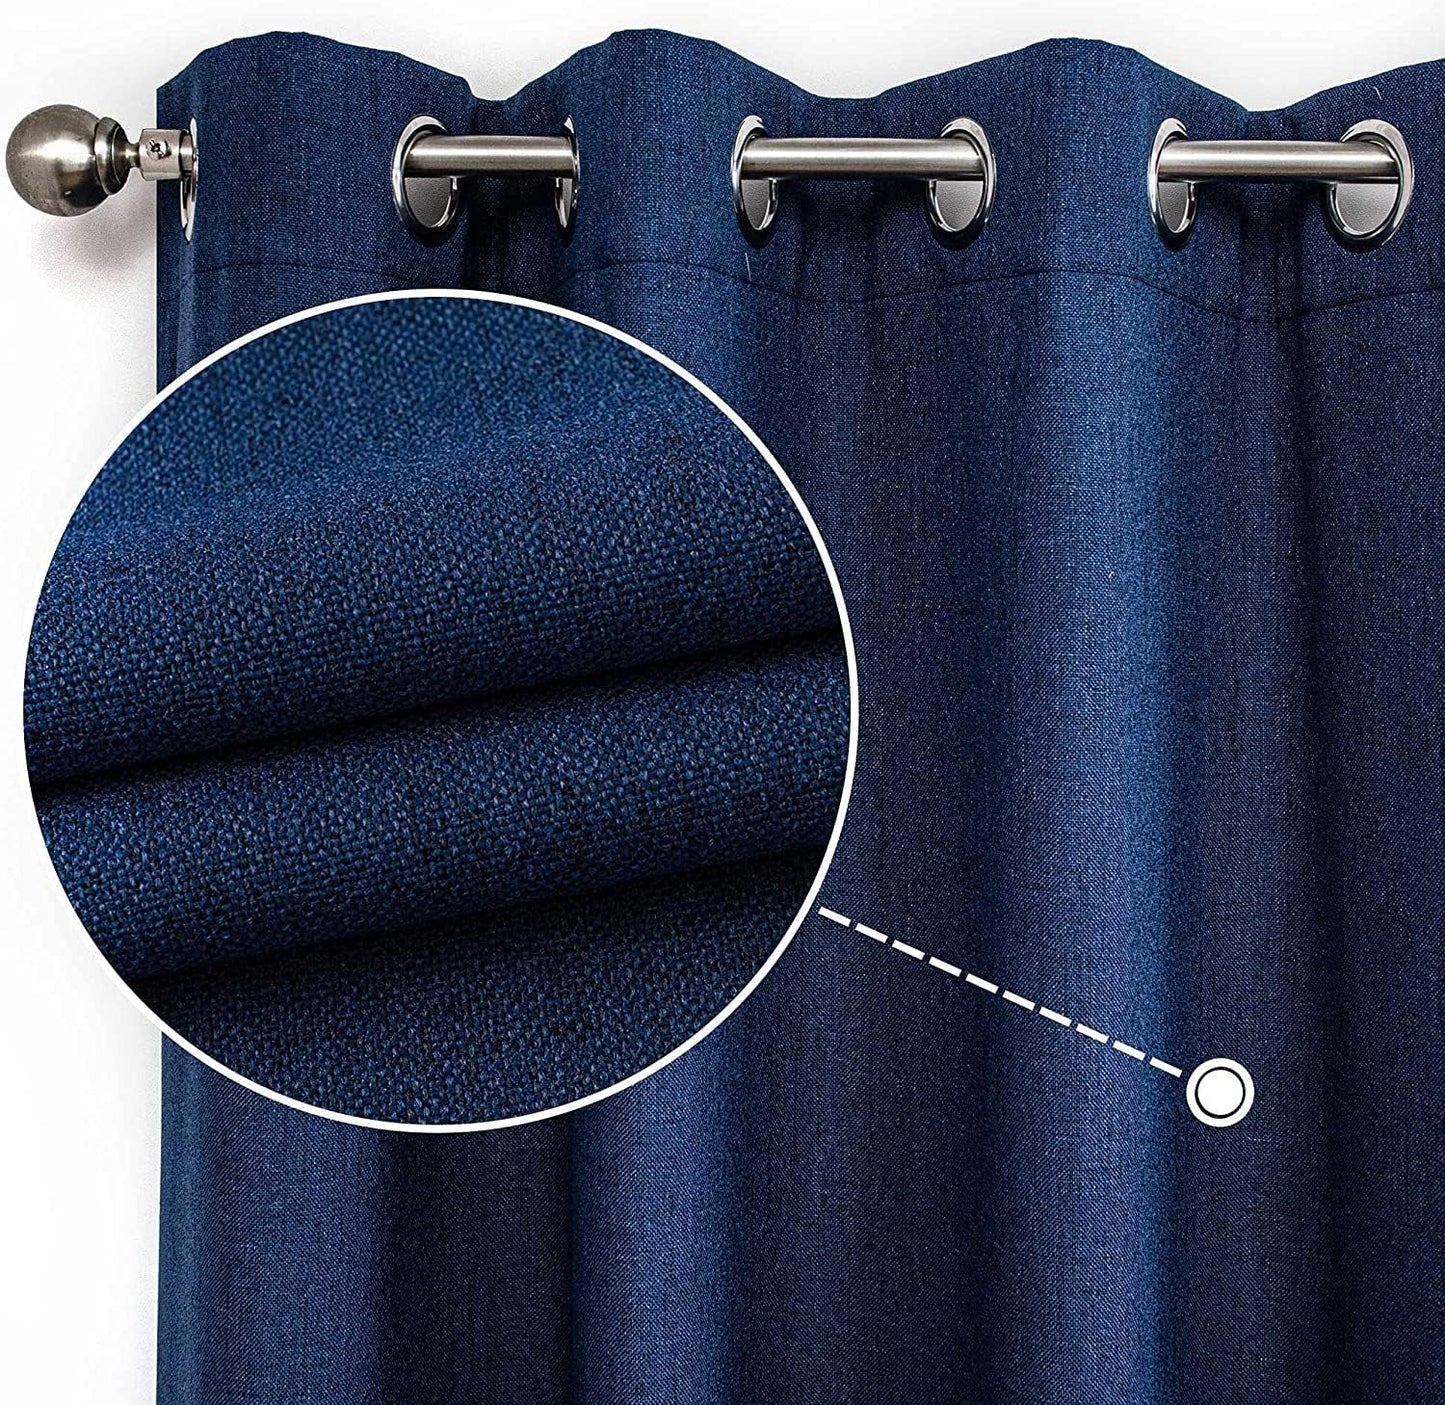 CUCRAF Full Blackout Window Curtains 84 Inches Long,Faux Linen Look Thermal Insulated Grommet Drapes Panels for Bedroom Living Room,Set of 2(52 X 84 Inches, Light Khaki)  CUCRAF Navy Blue 52 X 90 Inches 